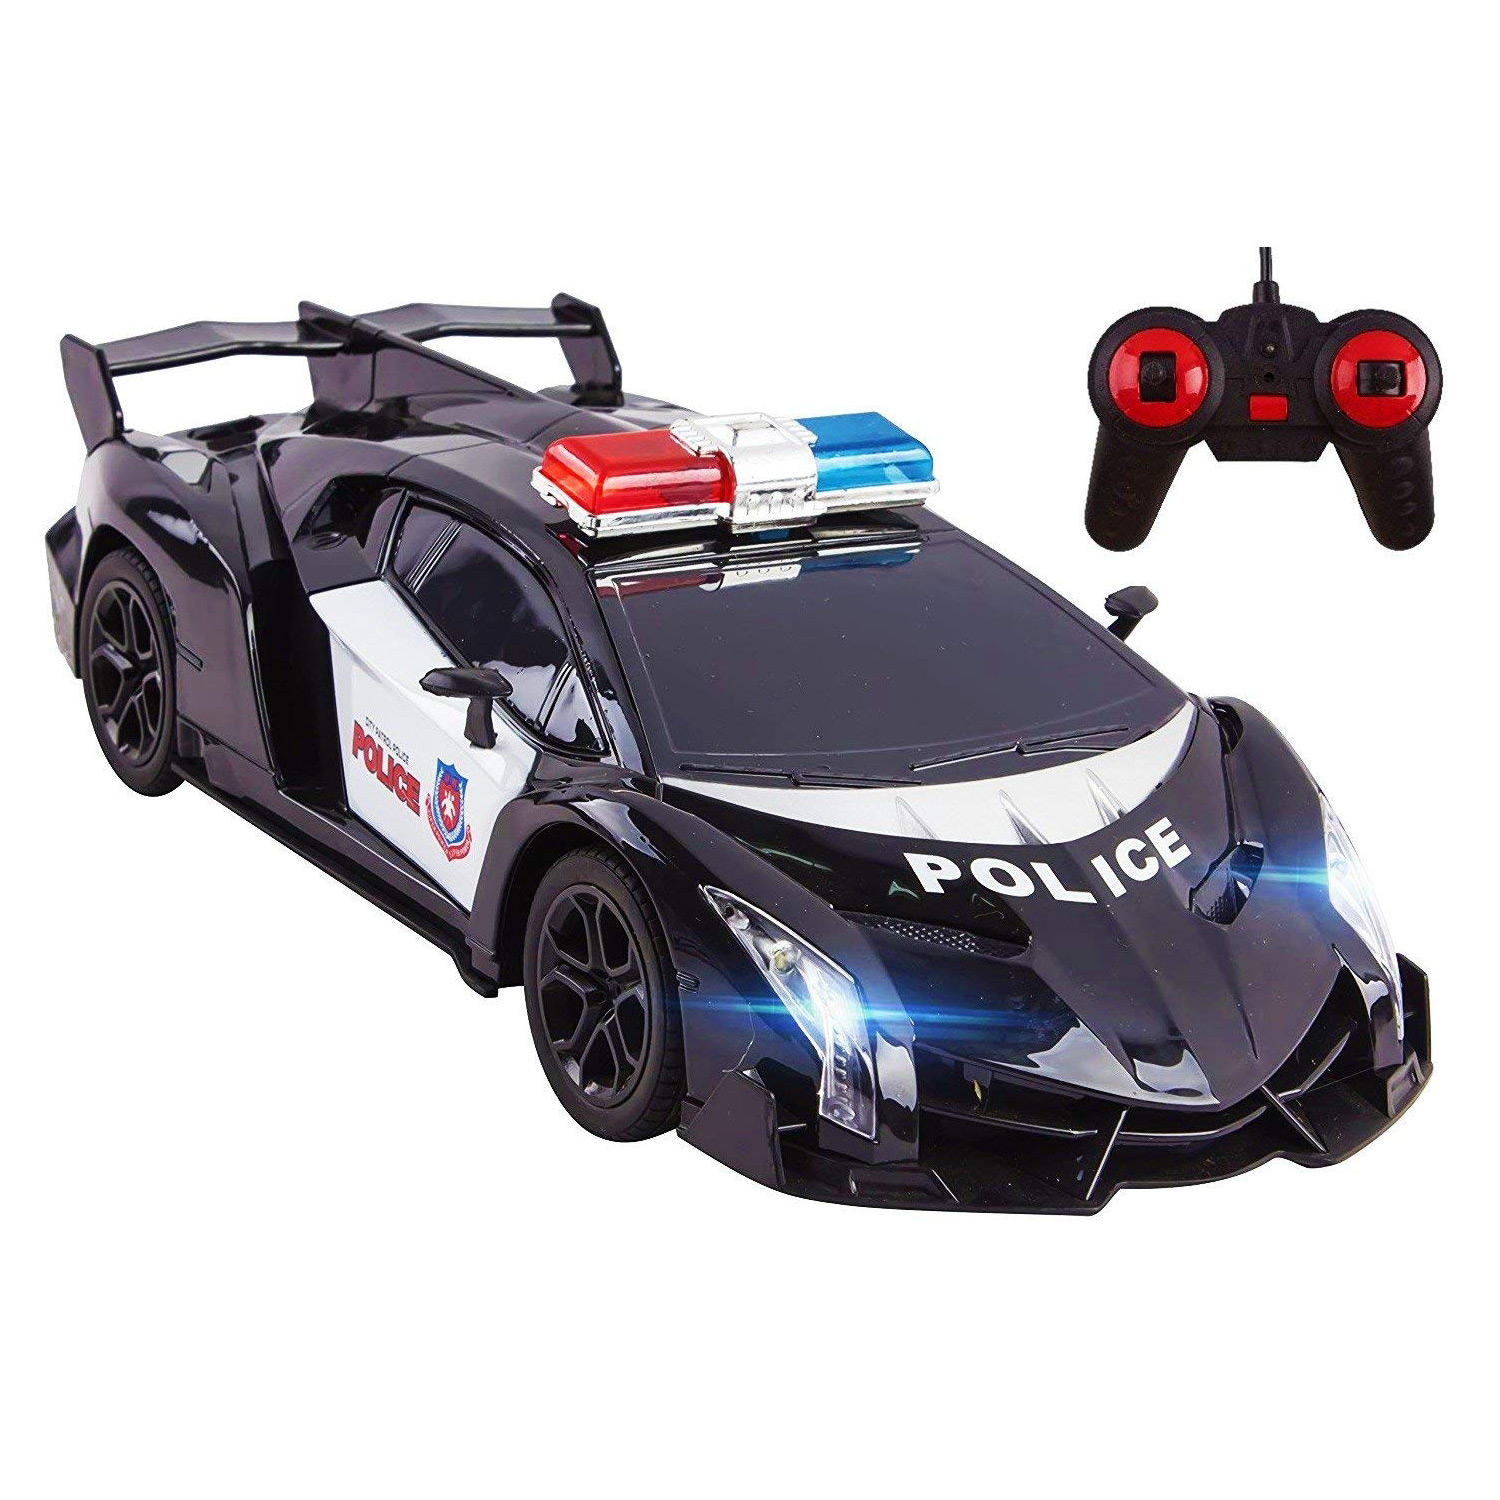 Police RC Car Super Exotic Large 1:16 Scale Size Kids Remote Control Easy To Operate Toy Sports Cars With Functional LED Headlights Perfect Cop Race Vehicle Full Function (Black)